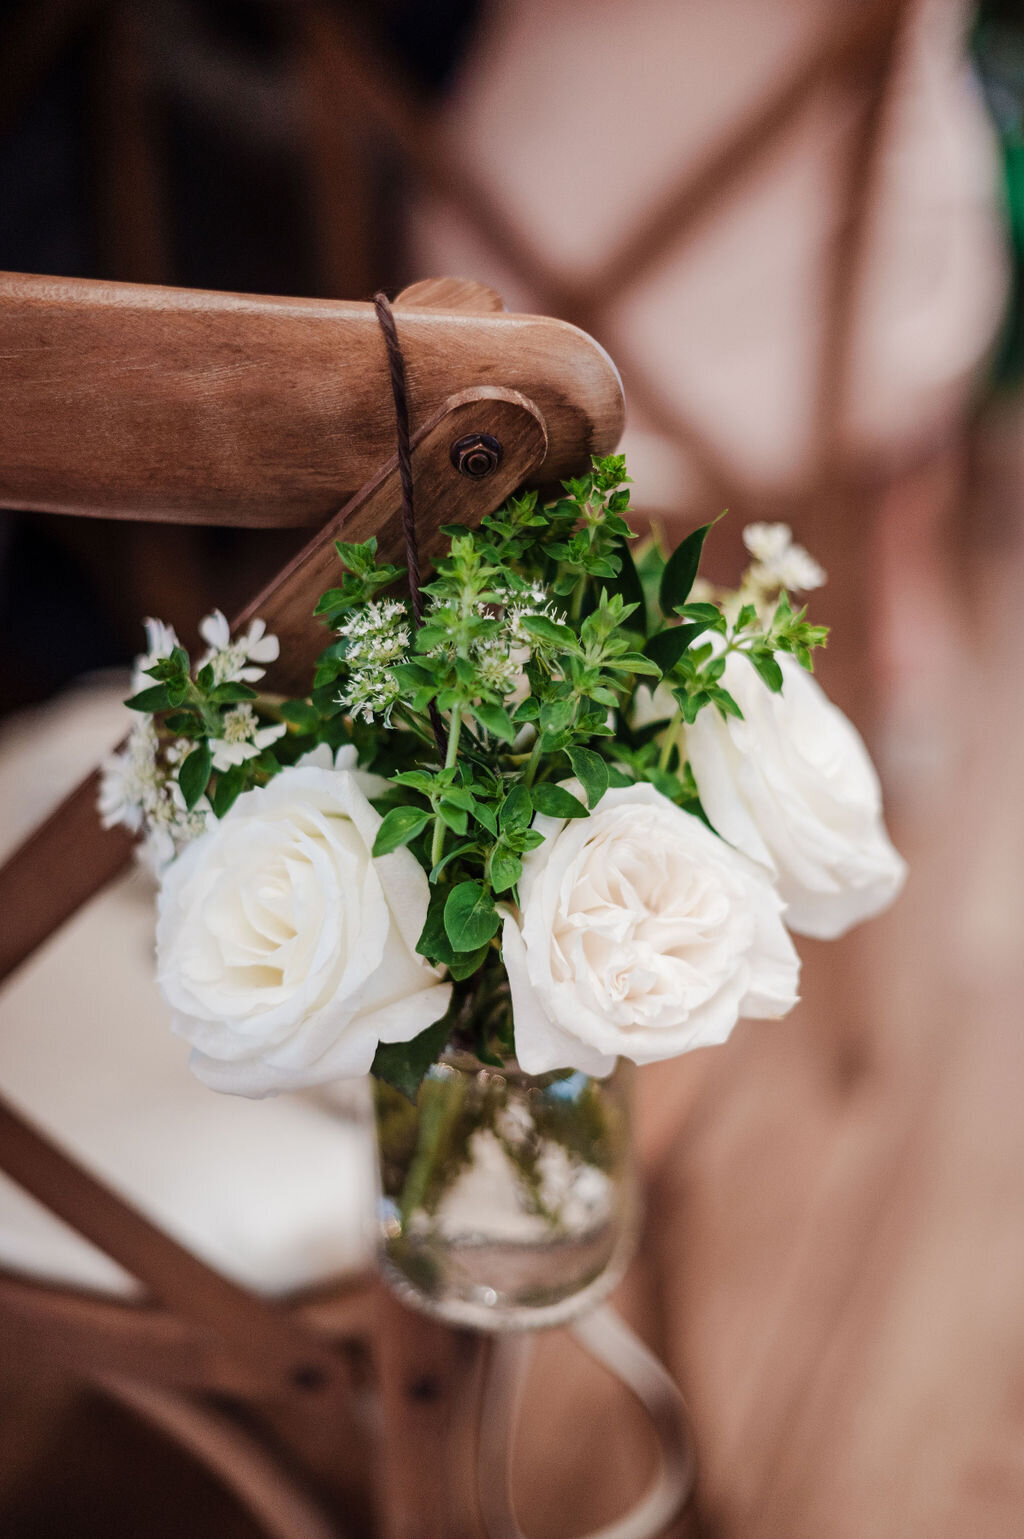 Ceremony decor along the aisle with white roses and fresh summer herbs